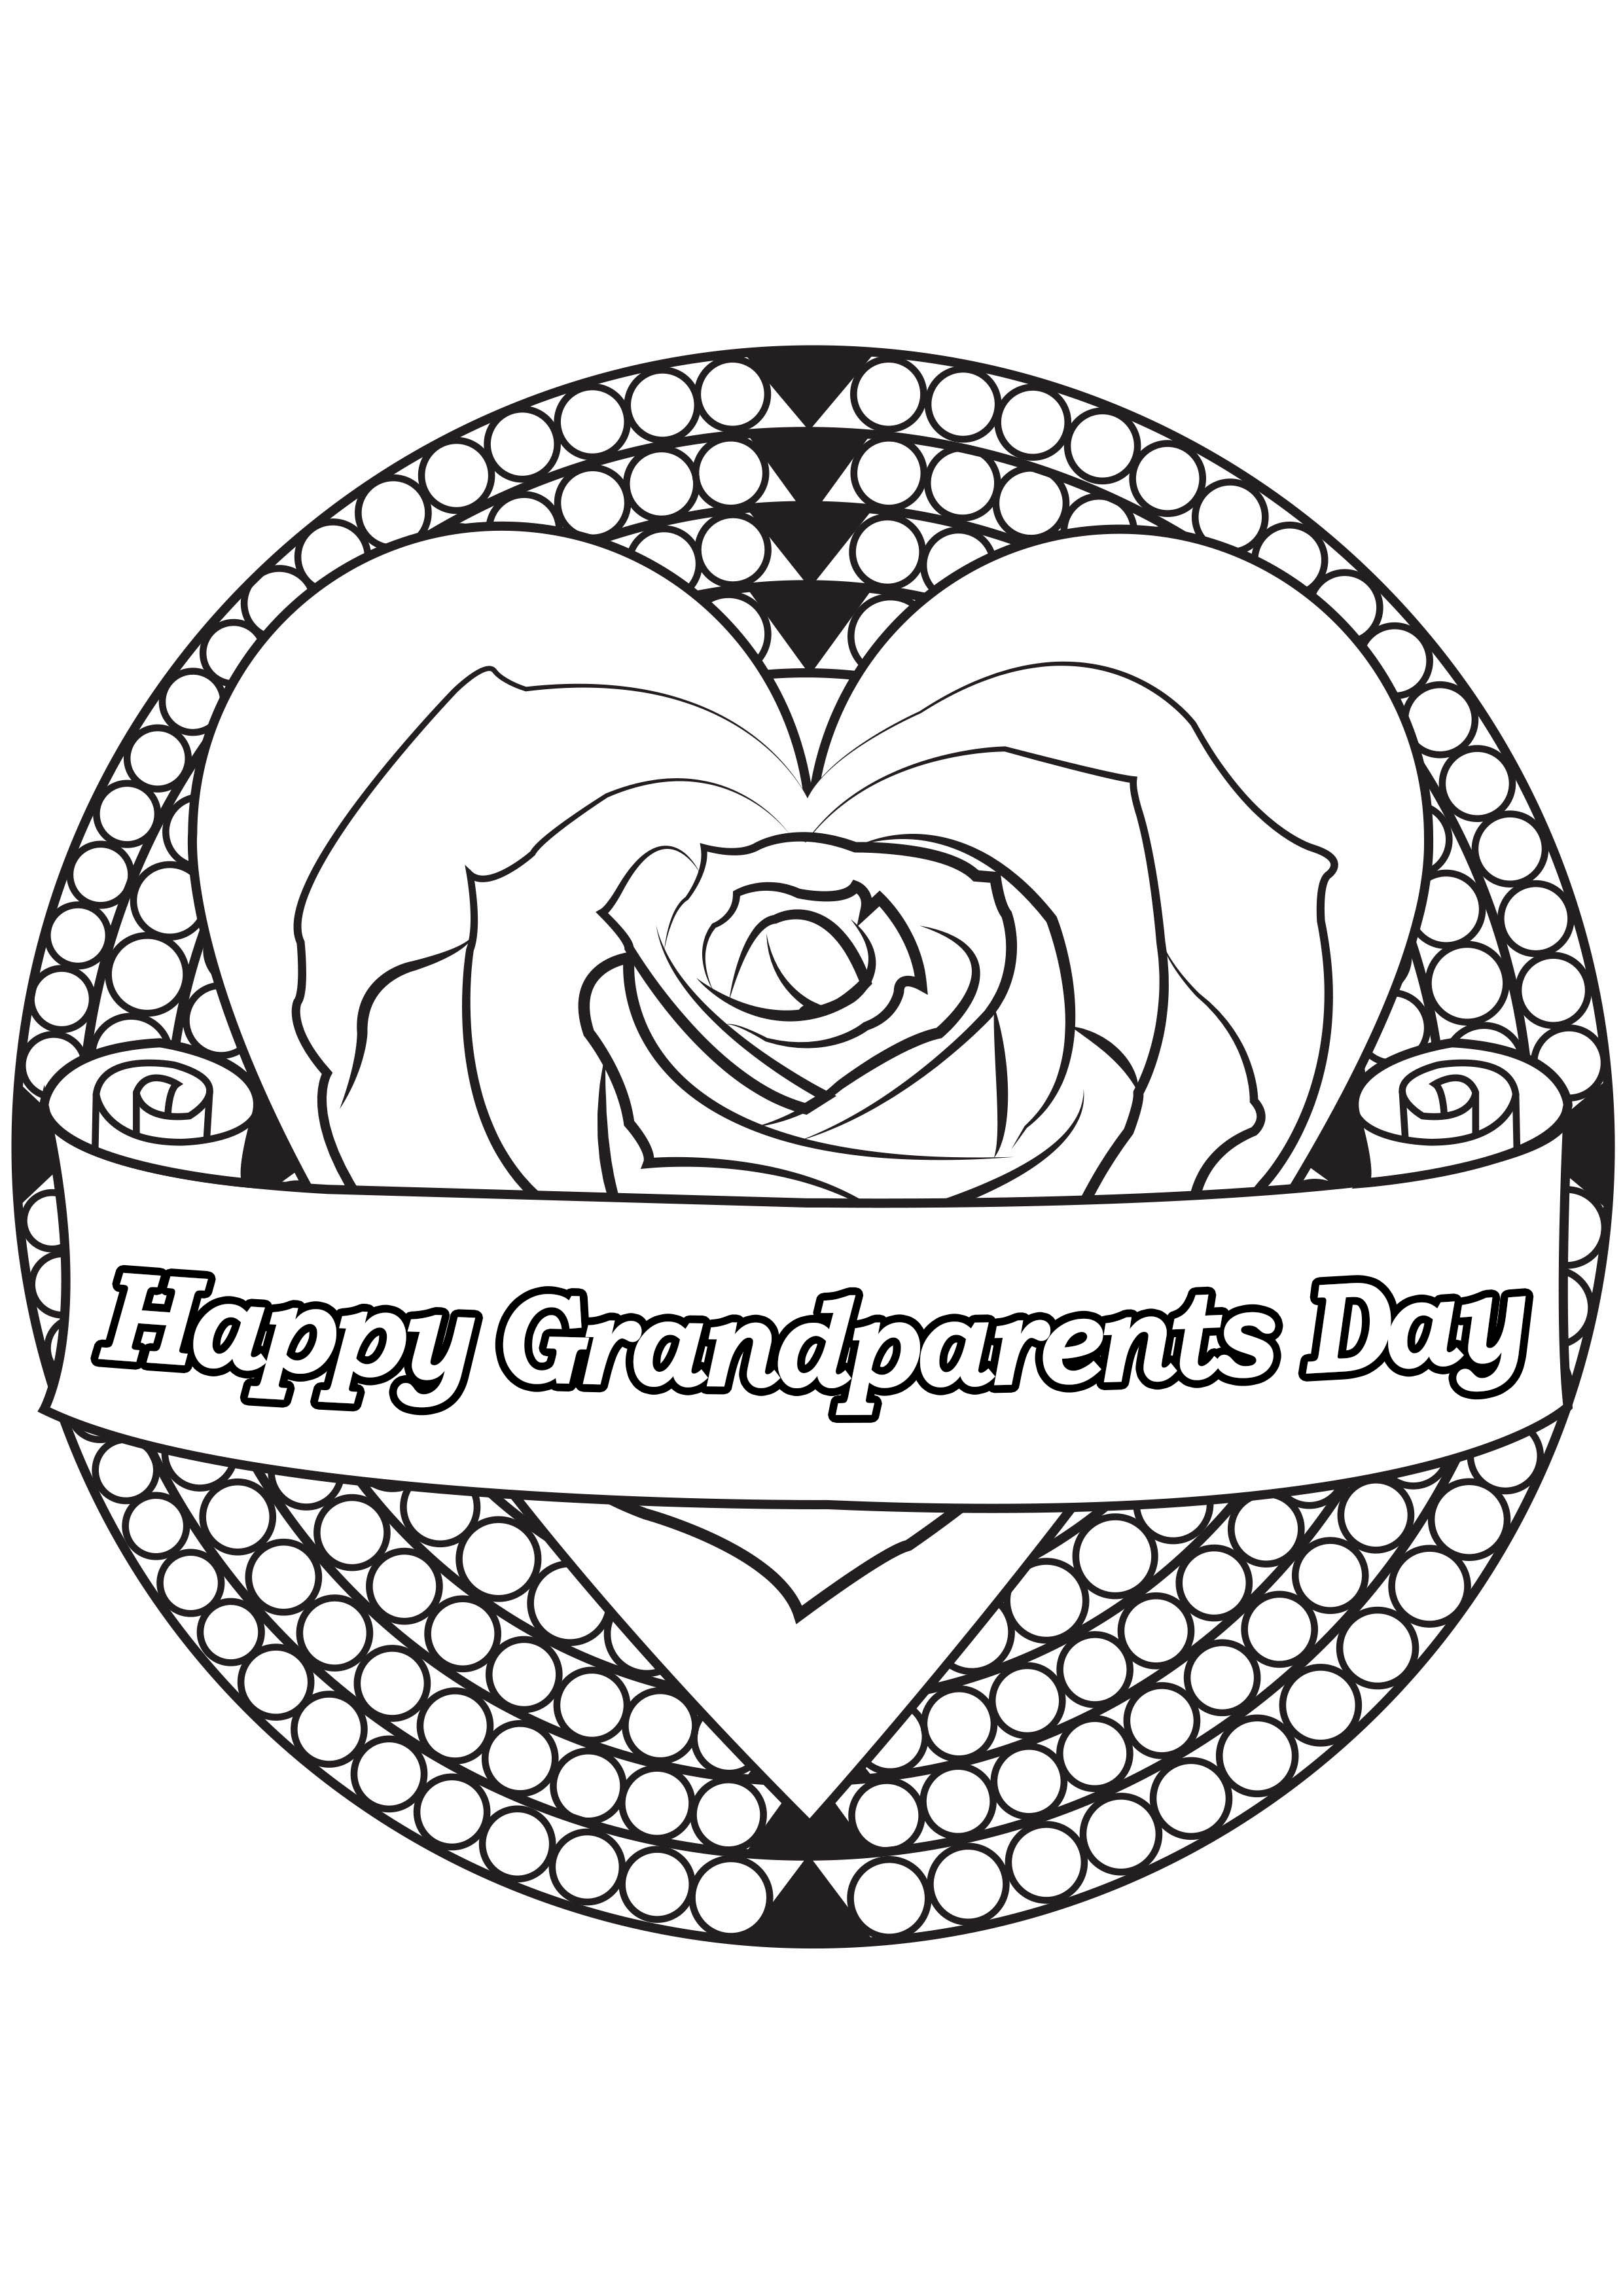 Grandparents day coloring page : heart & rose, Artist : Allan